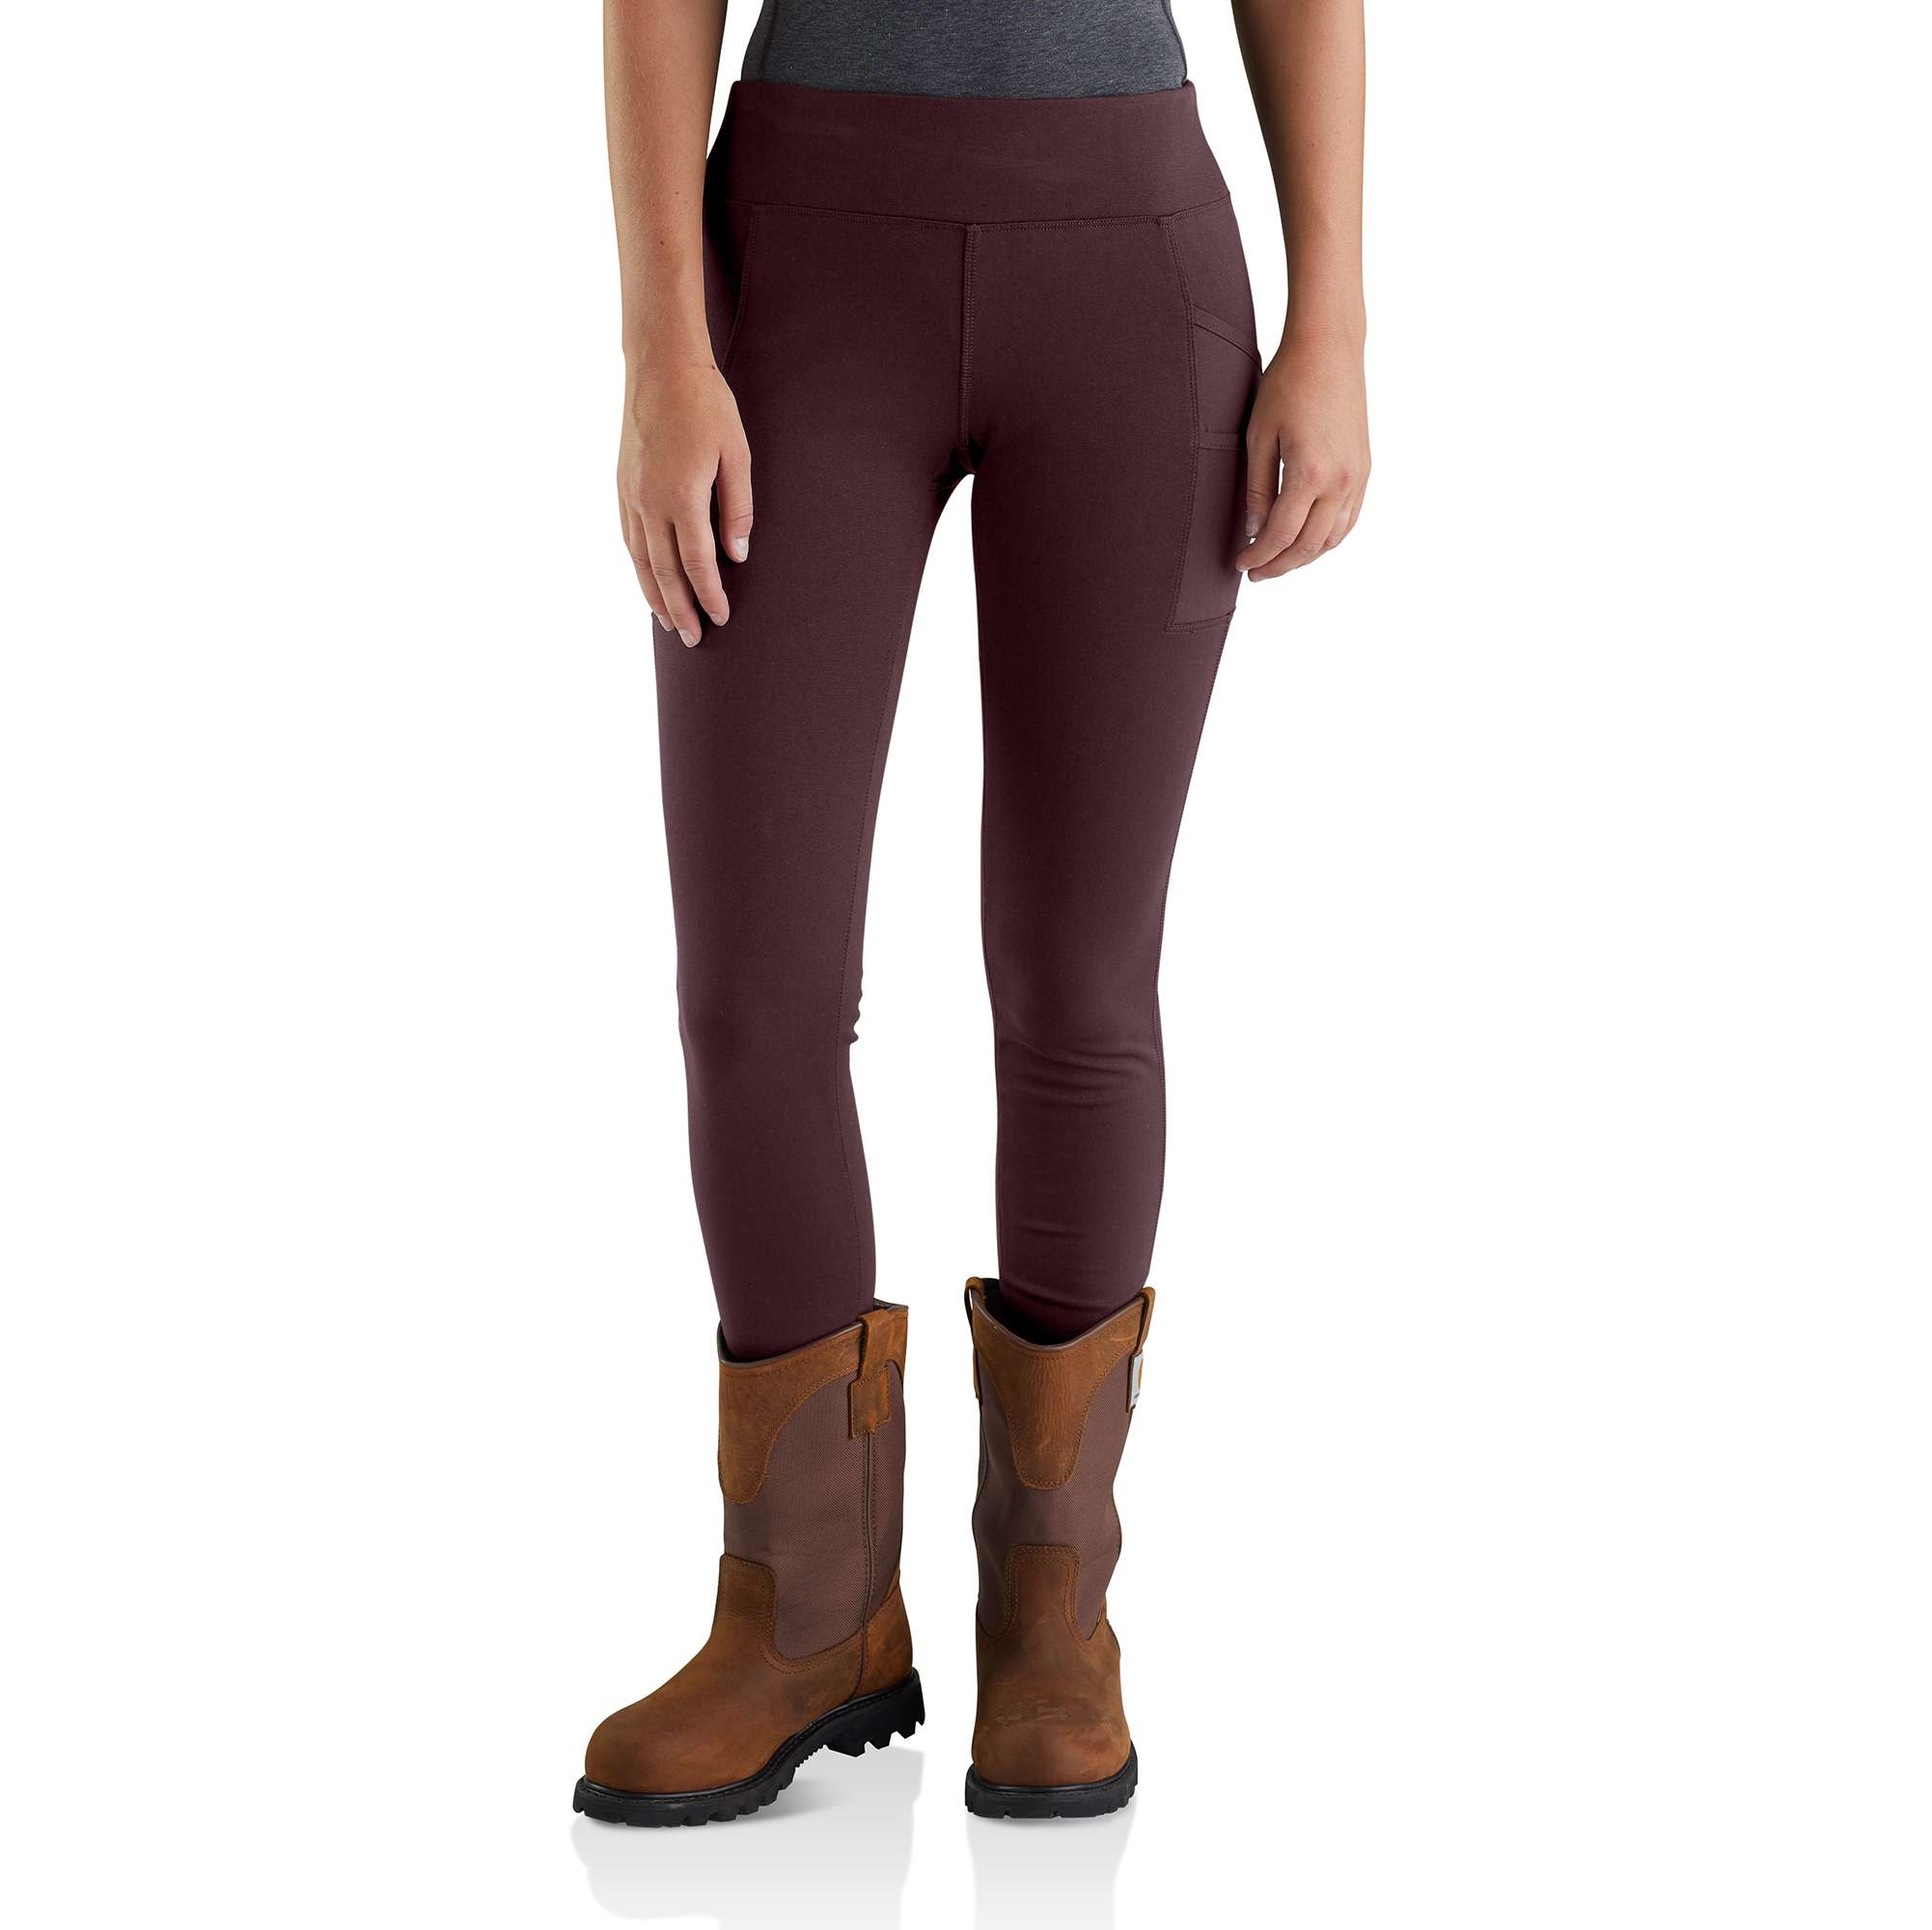 Carhartt Women's Force Fitted Lightweight Ankle Length Legging (Plus Size)